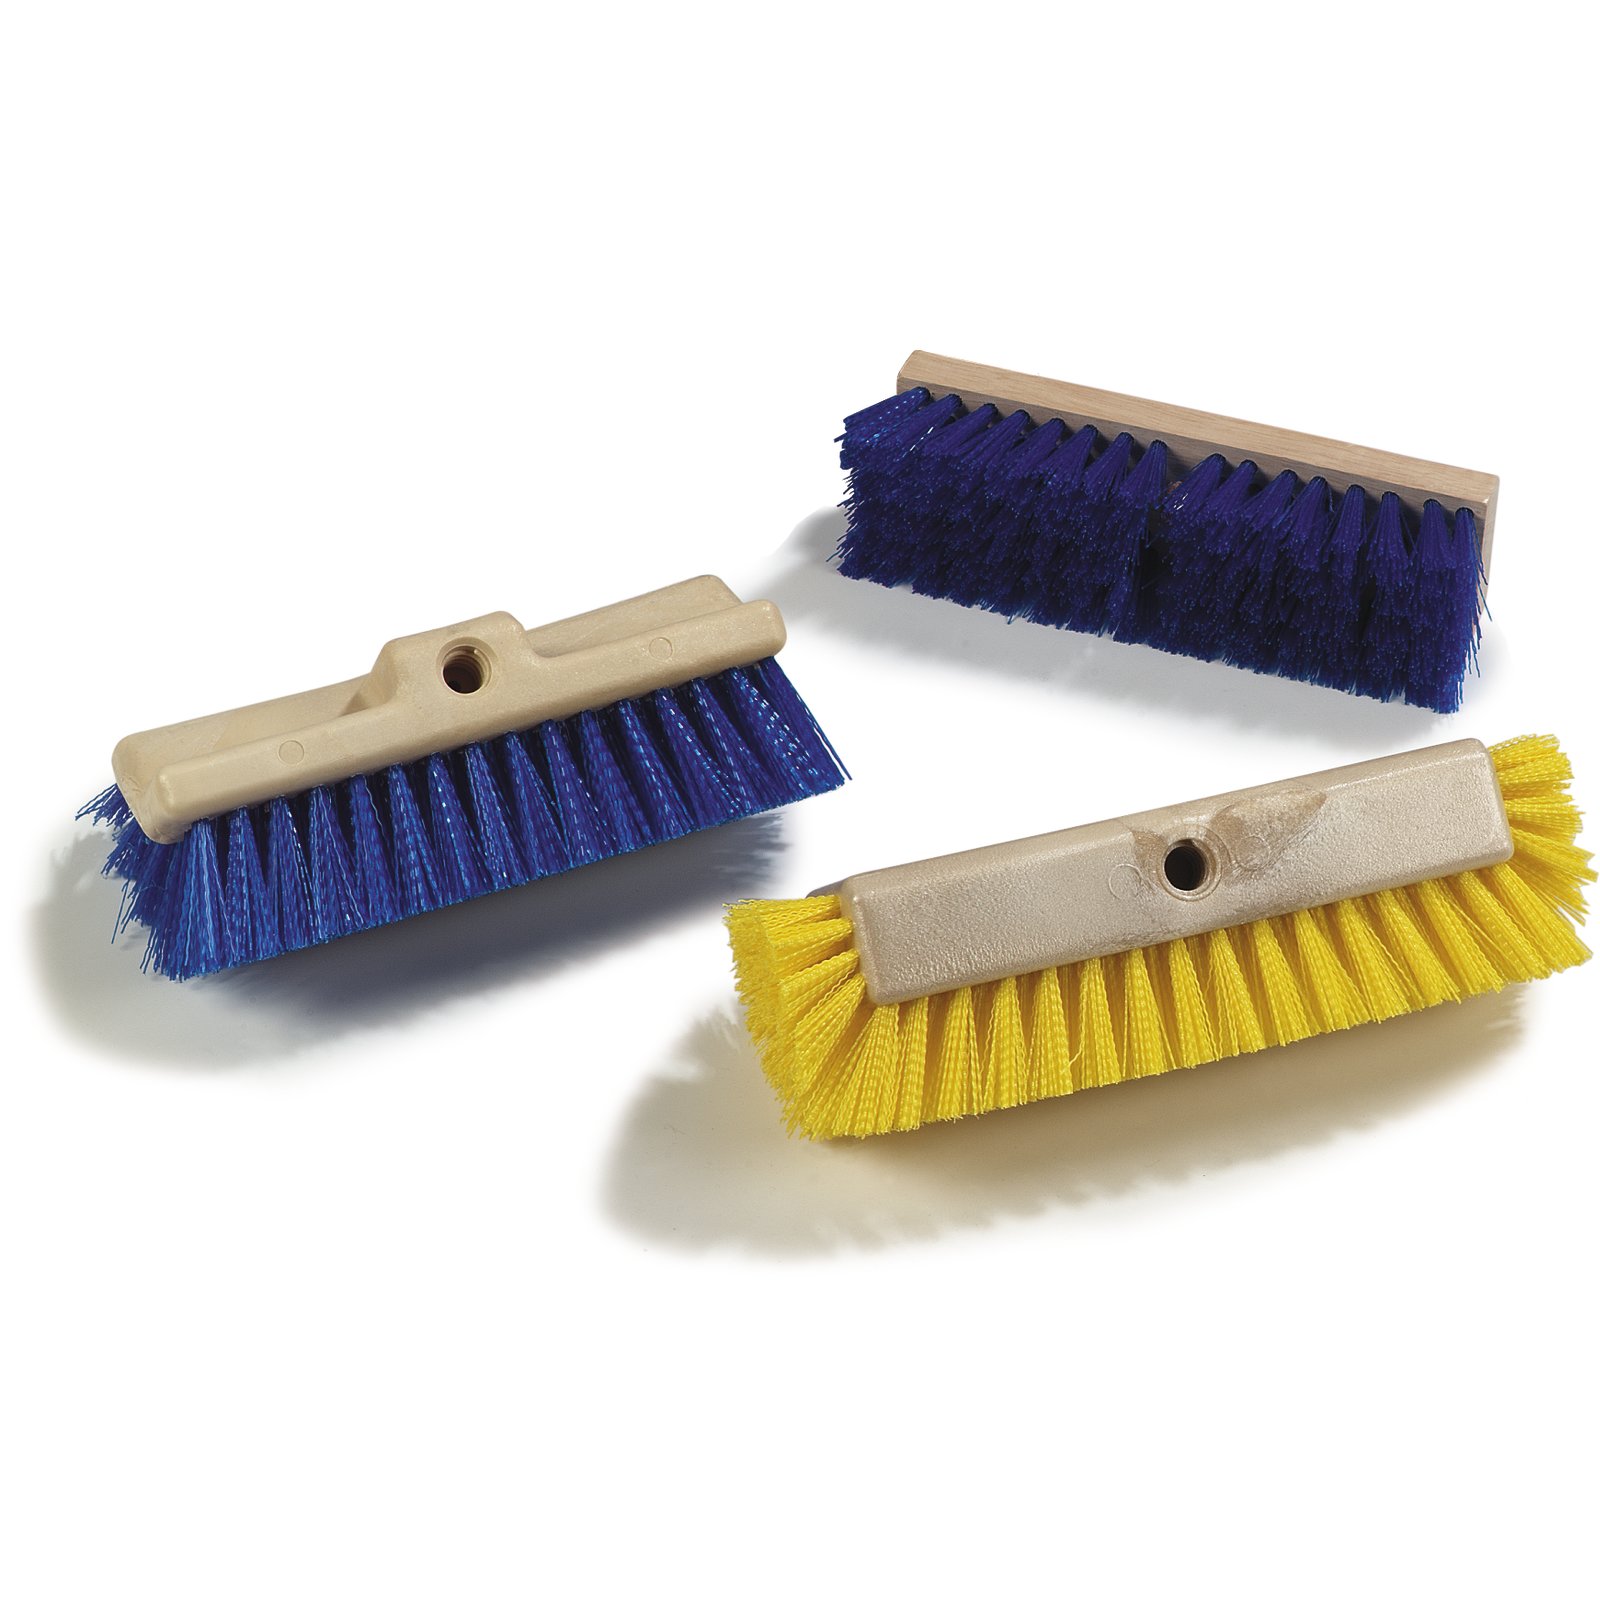  Washing Machine Cleaning Brush, Washer Cleaning Brush, Groove  Crevice Brush, Gap Cleaning Brush, Nylon Cleaner Scrub Brush, Washer Drum Brush  Cleaning Tool for Front Load Washer (3PCS) : Health & Household